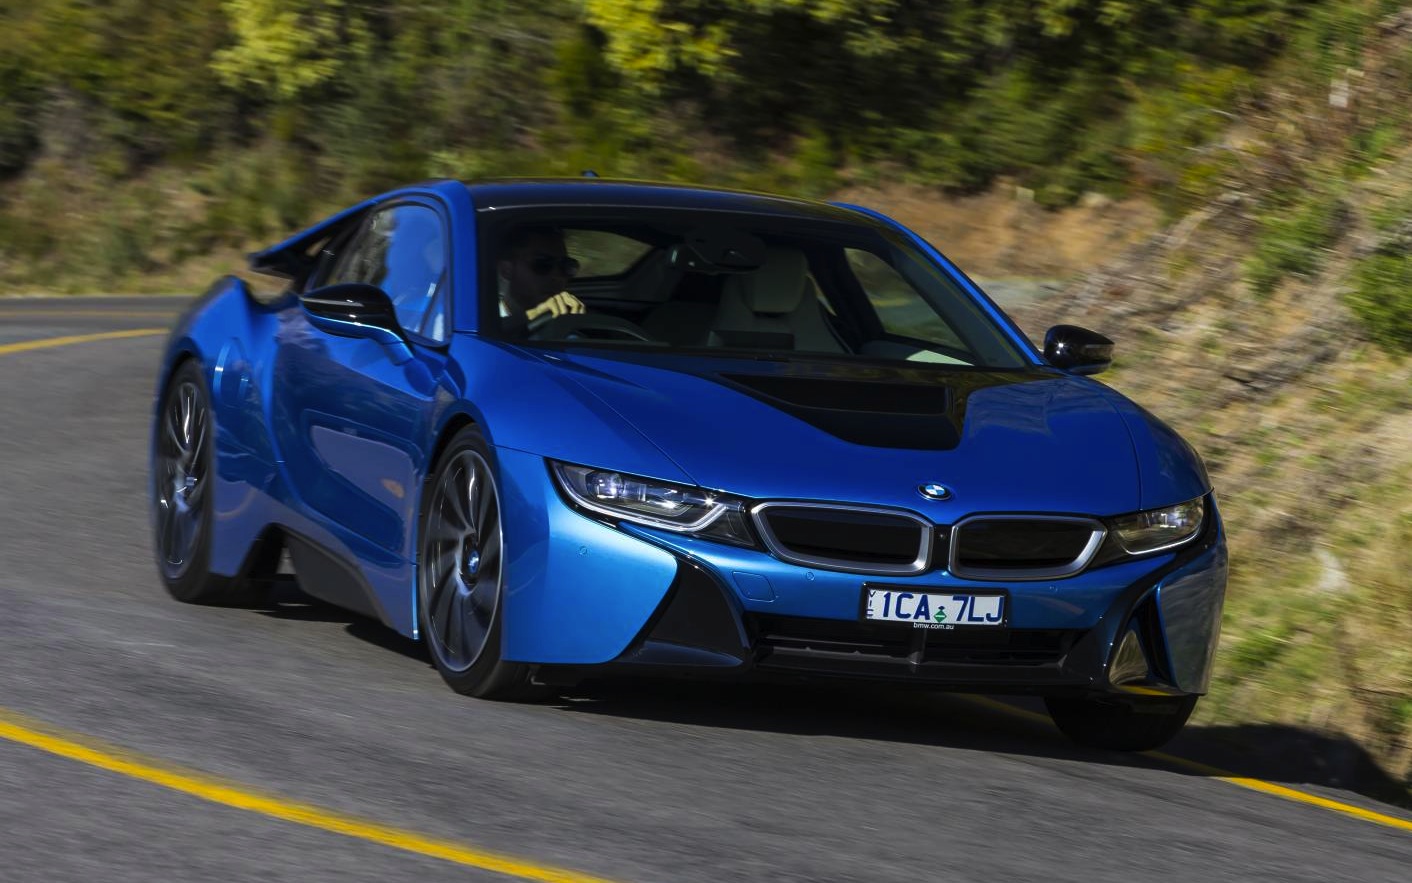 2015 World Car of the Year finalists announced